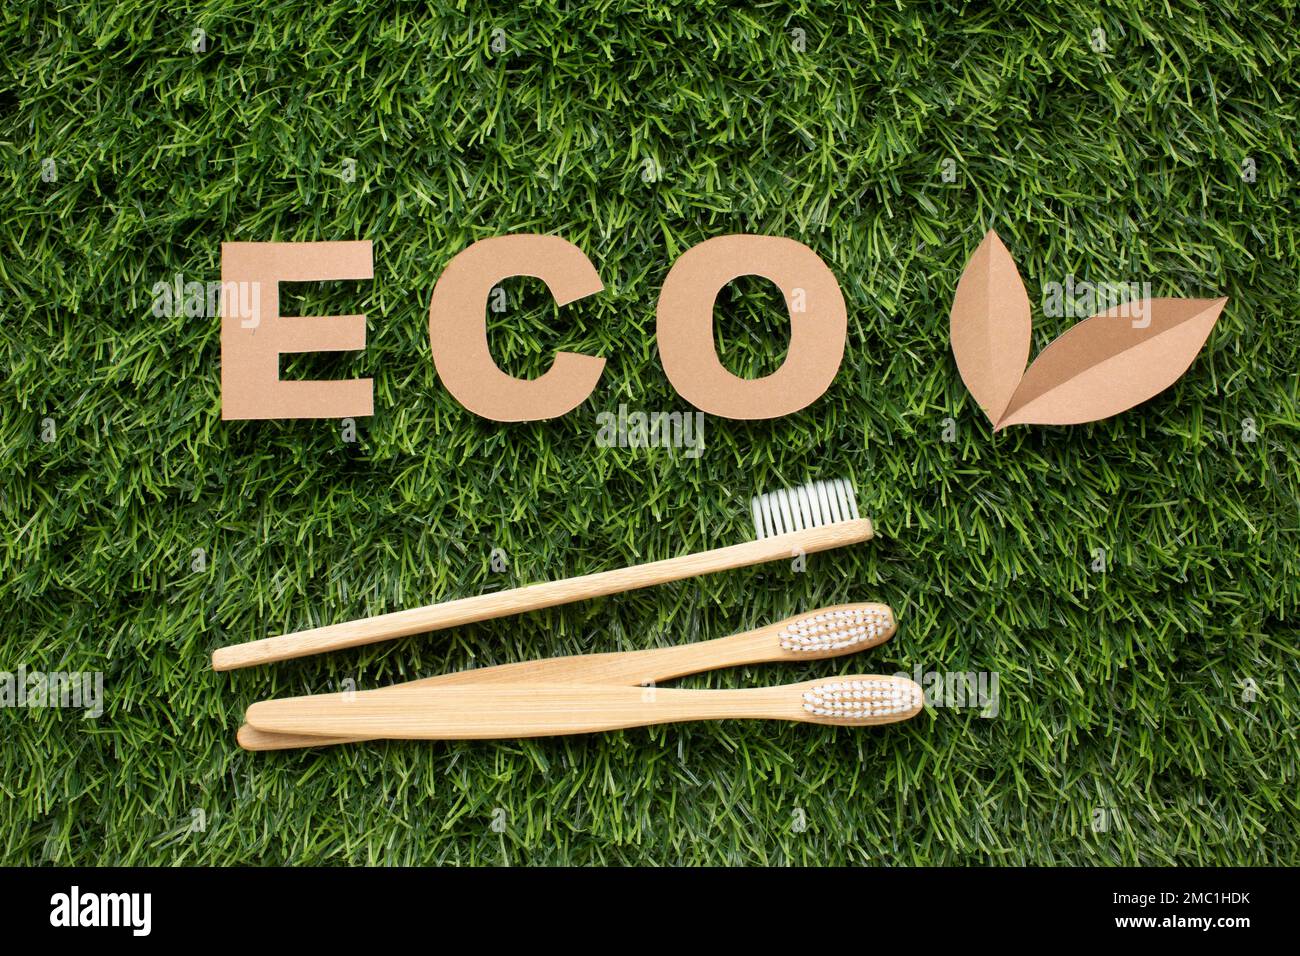 Ecological toothbrushes grass Stock Photo